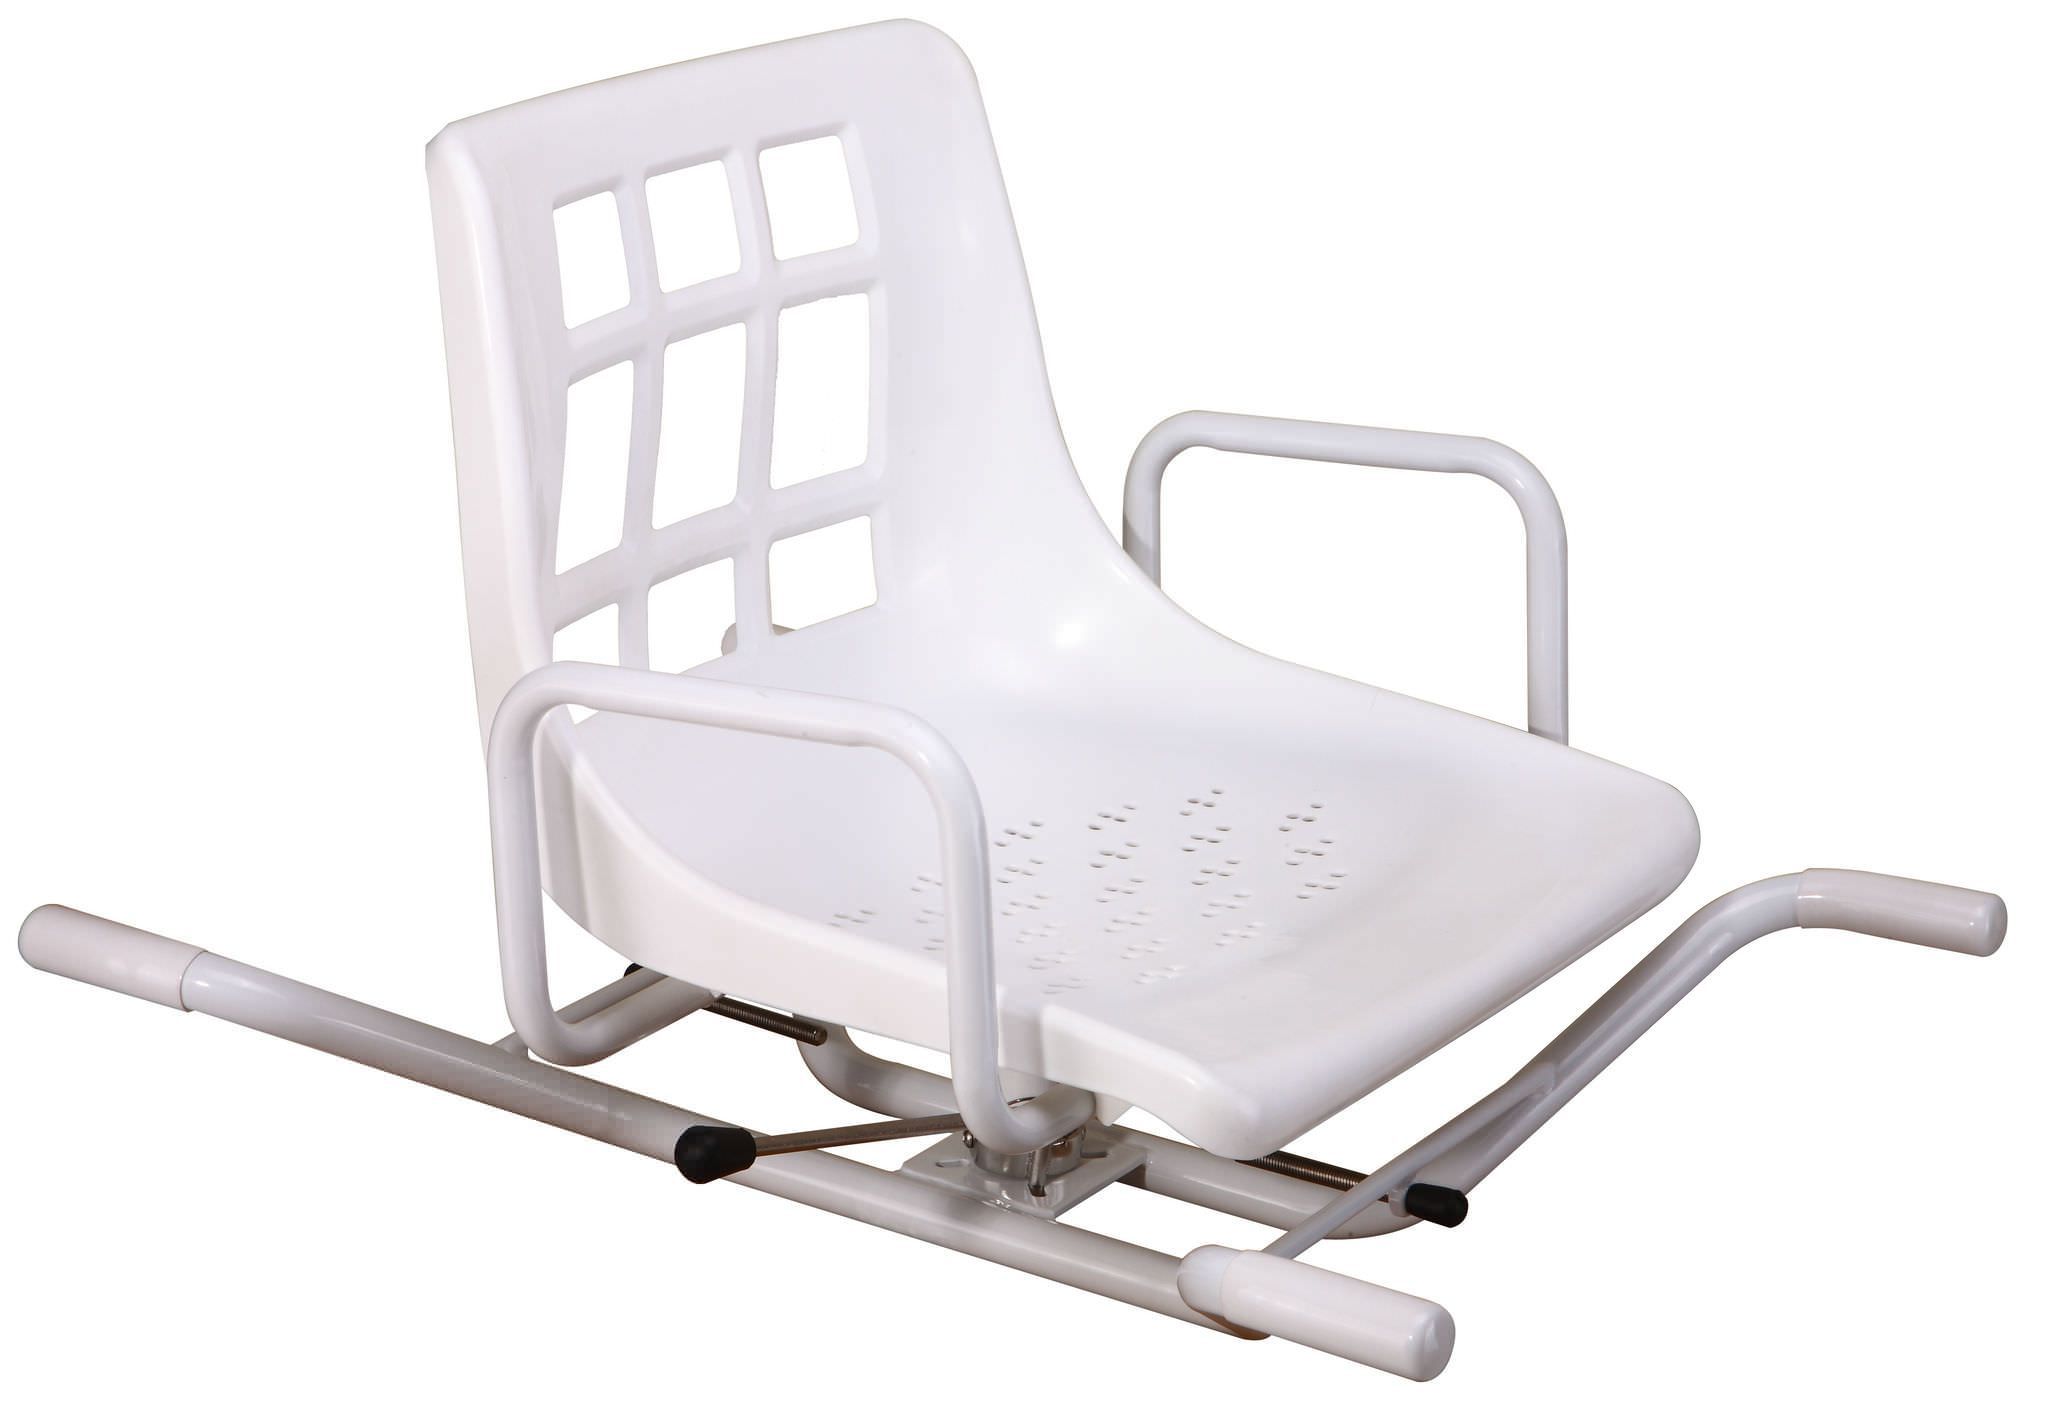 Bathtub seat / with backrest / suspended / 1-person JY-700 Guangdong Shunde Jaeyong Hardware